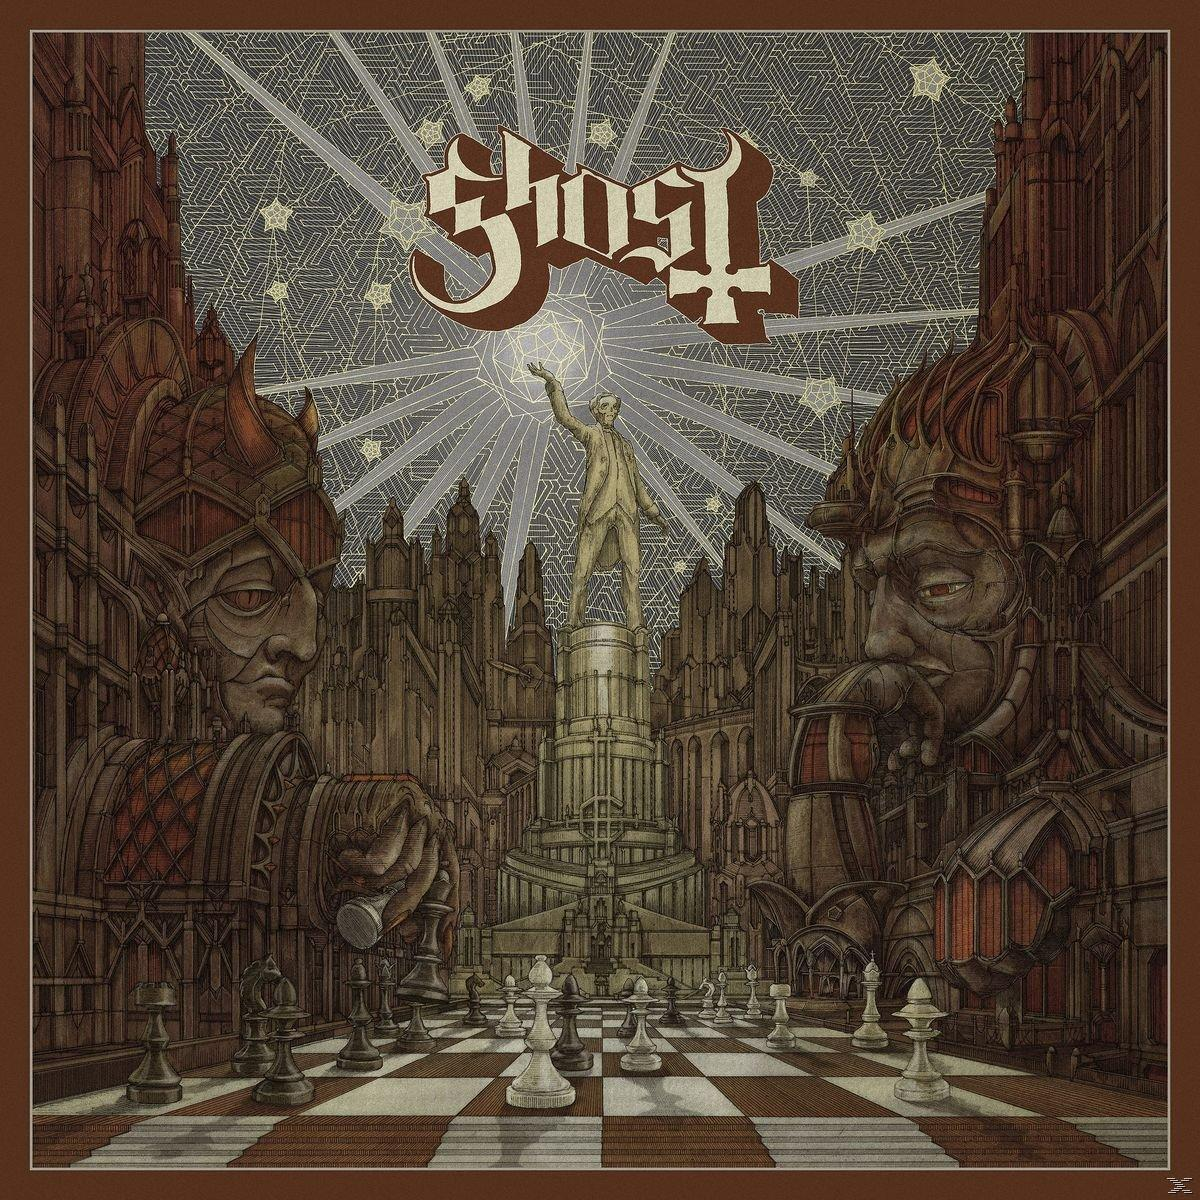 Ghost - Geistervater (CD) (EP) 